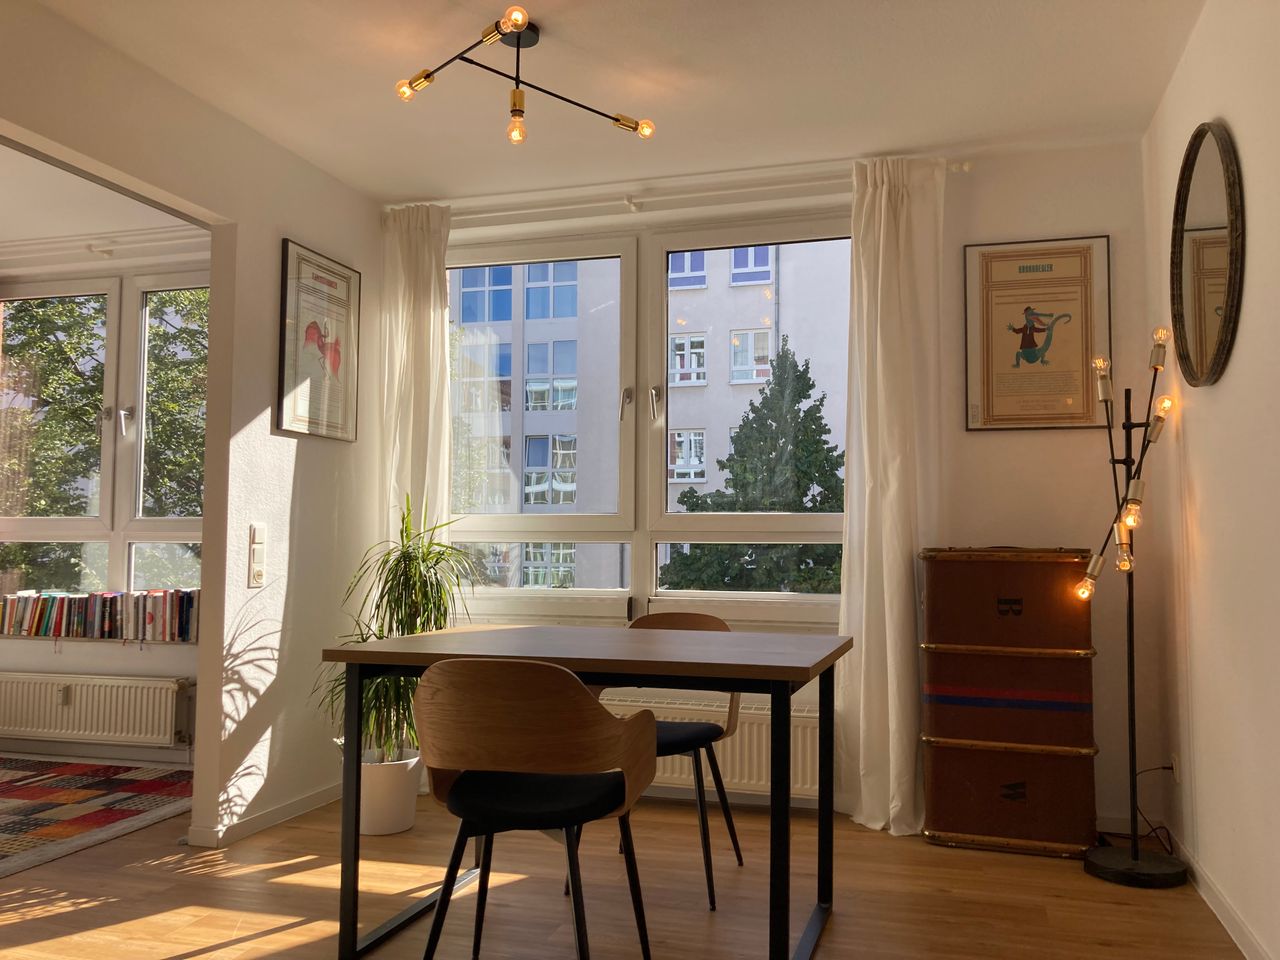 Centrally located: 2 room apartment in Prenzlauer Berg